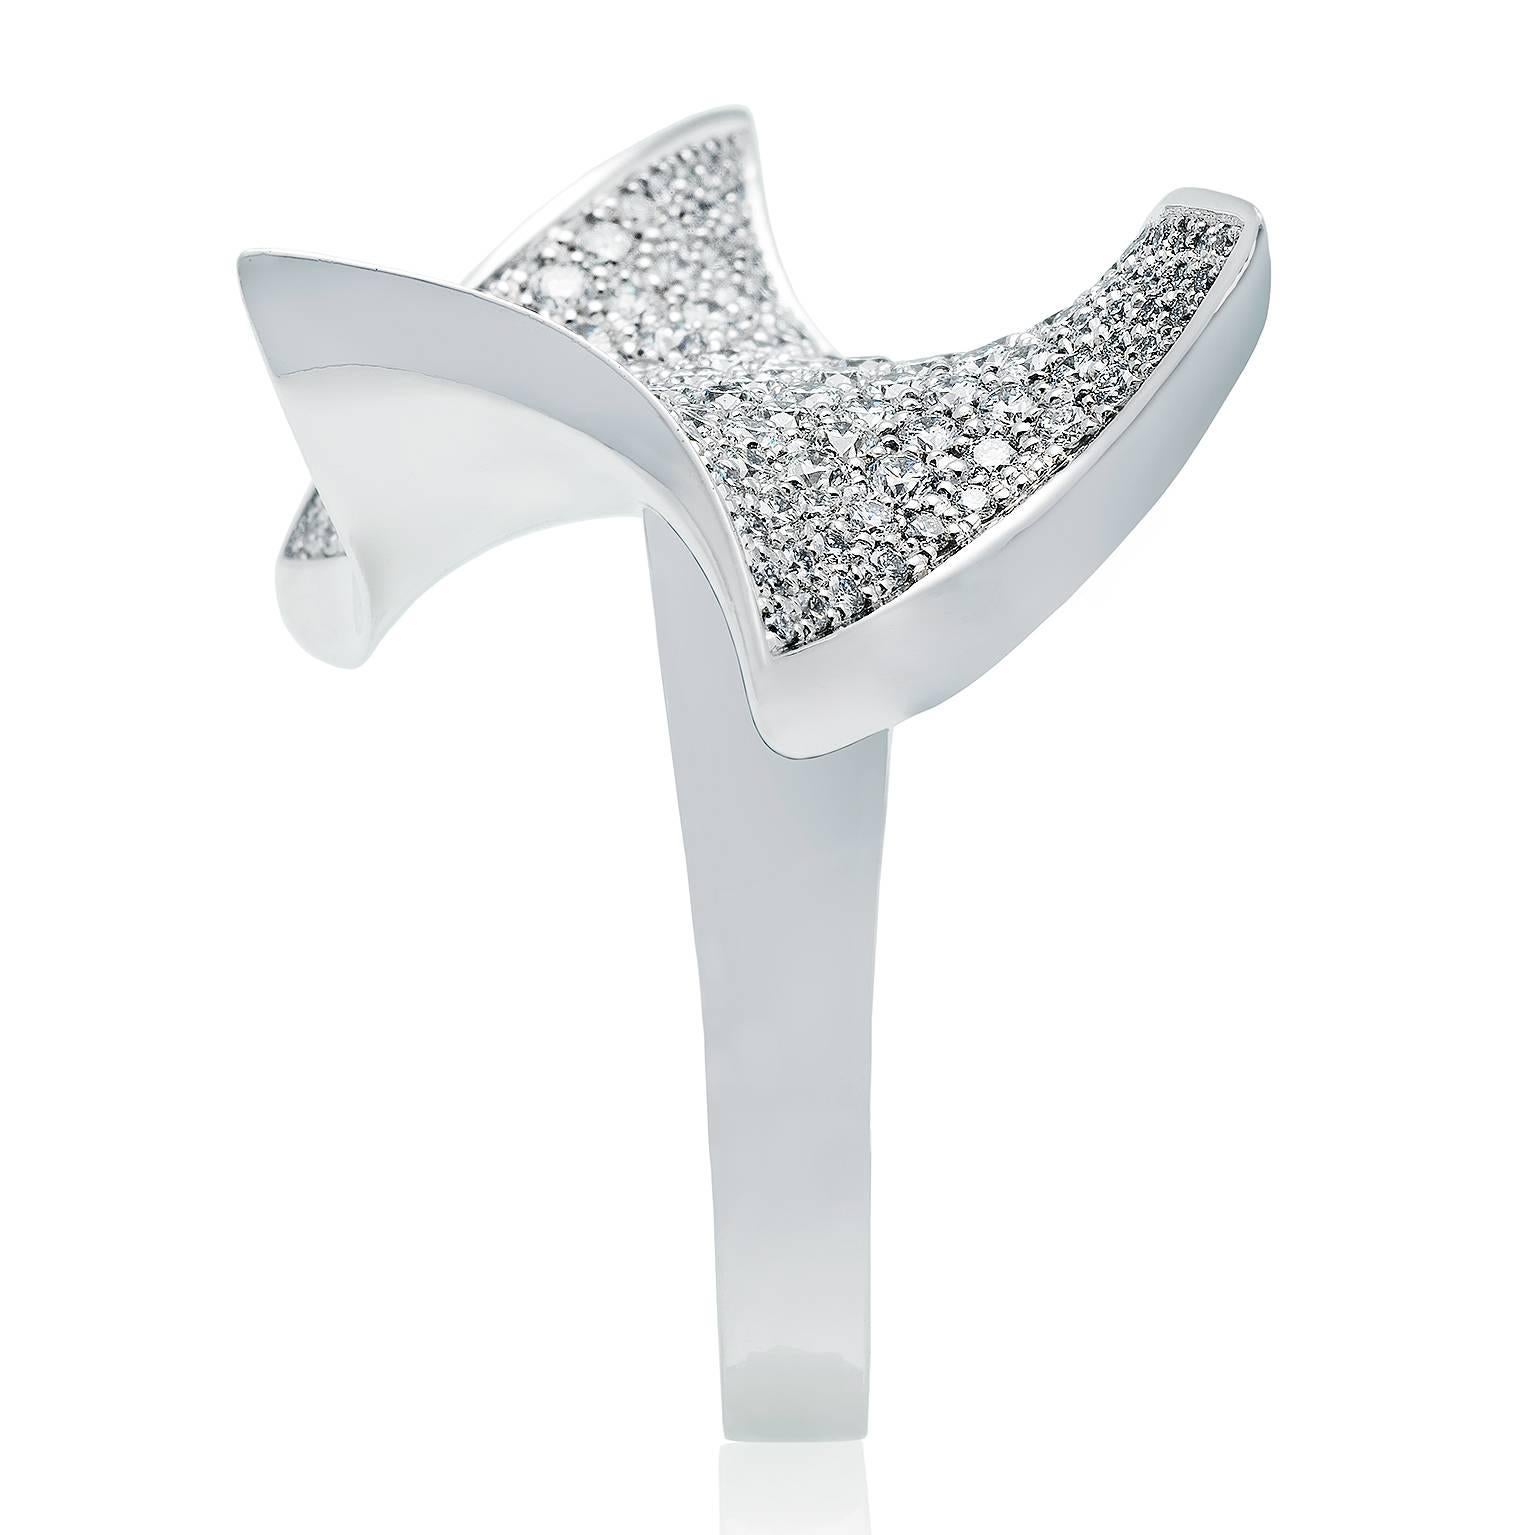 Towe Norlen Mantaray 2.33 Carat Contemporary Diamond Cocktail Ring For Sale 4